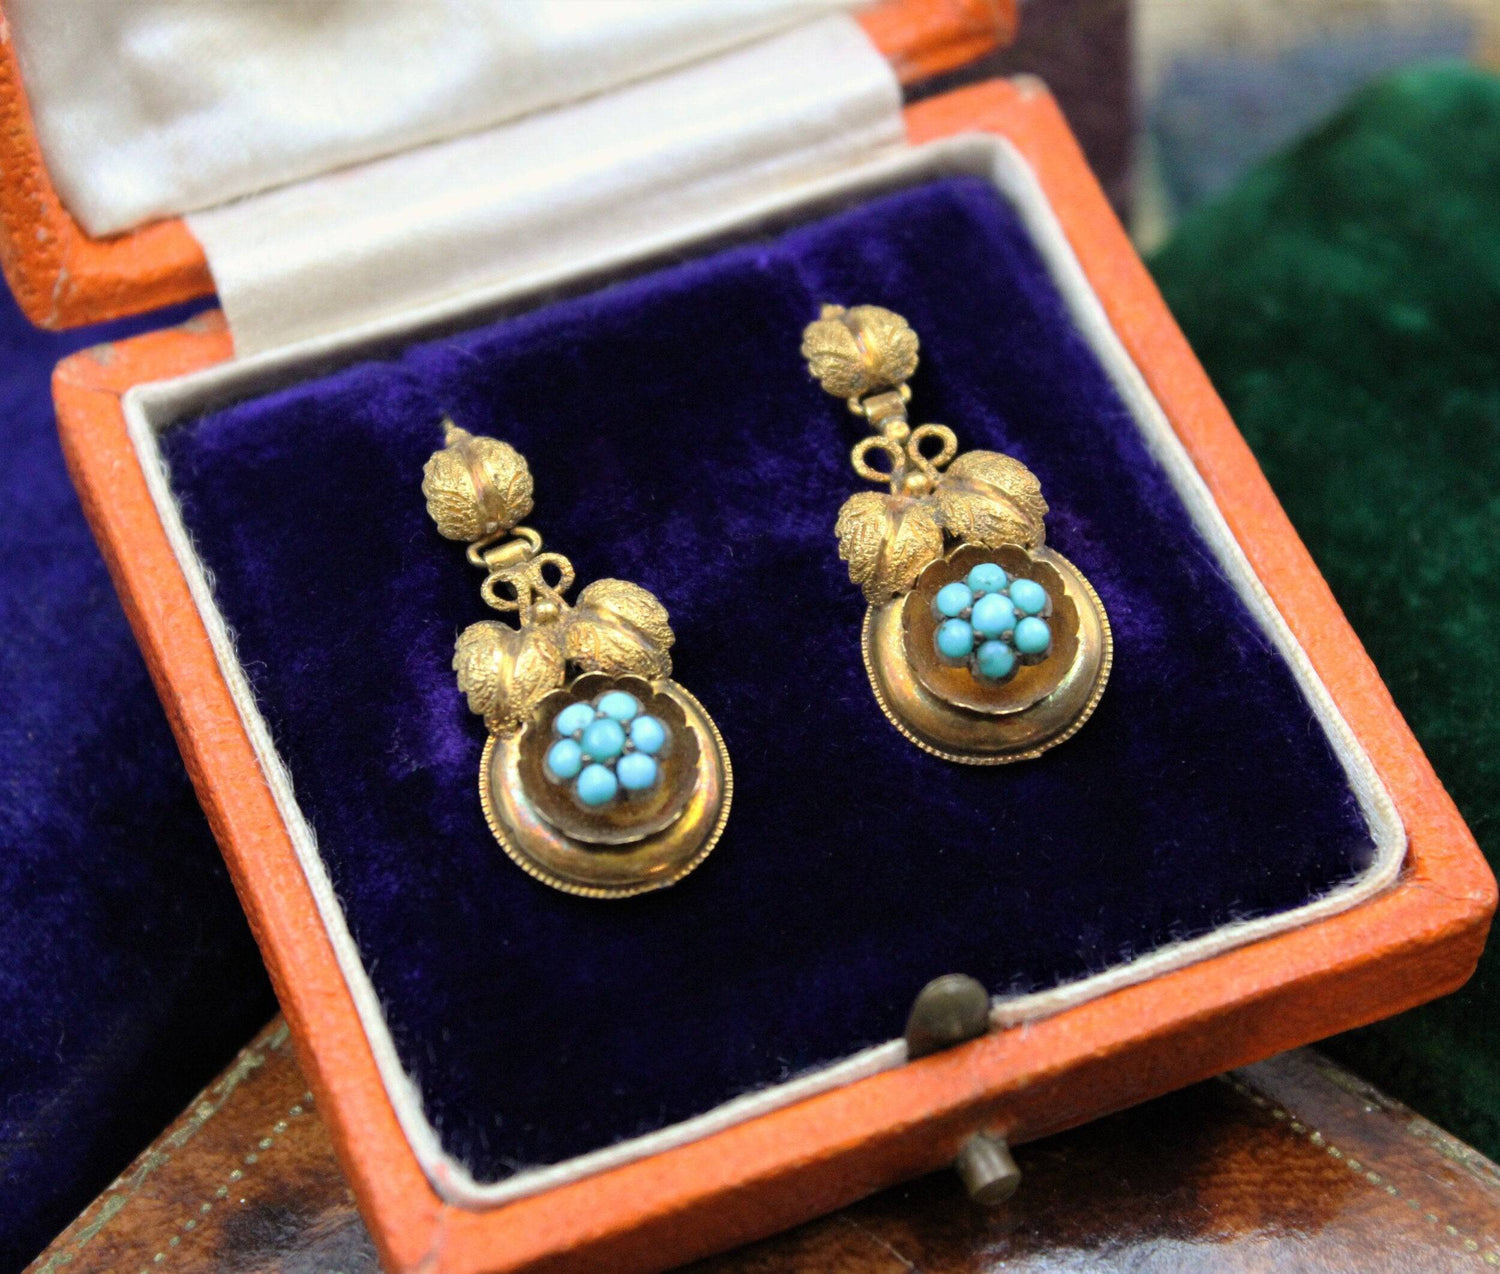 A fine pair of Victorian Foliate Drop Turquoise Earrings in High Carat Yellow Gold, English, Circa 1870 - Robin Haydock Antiques